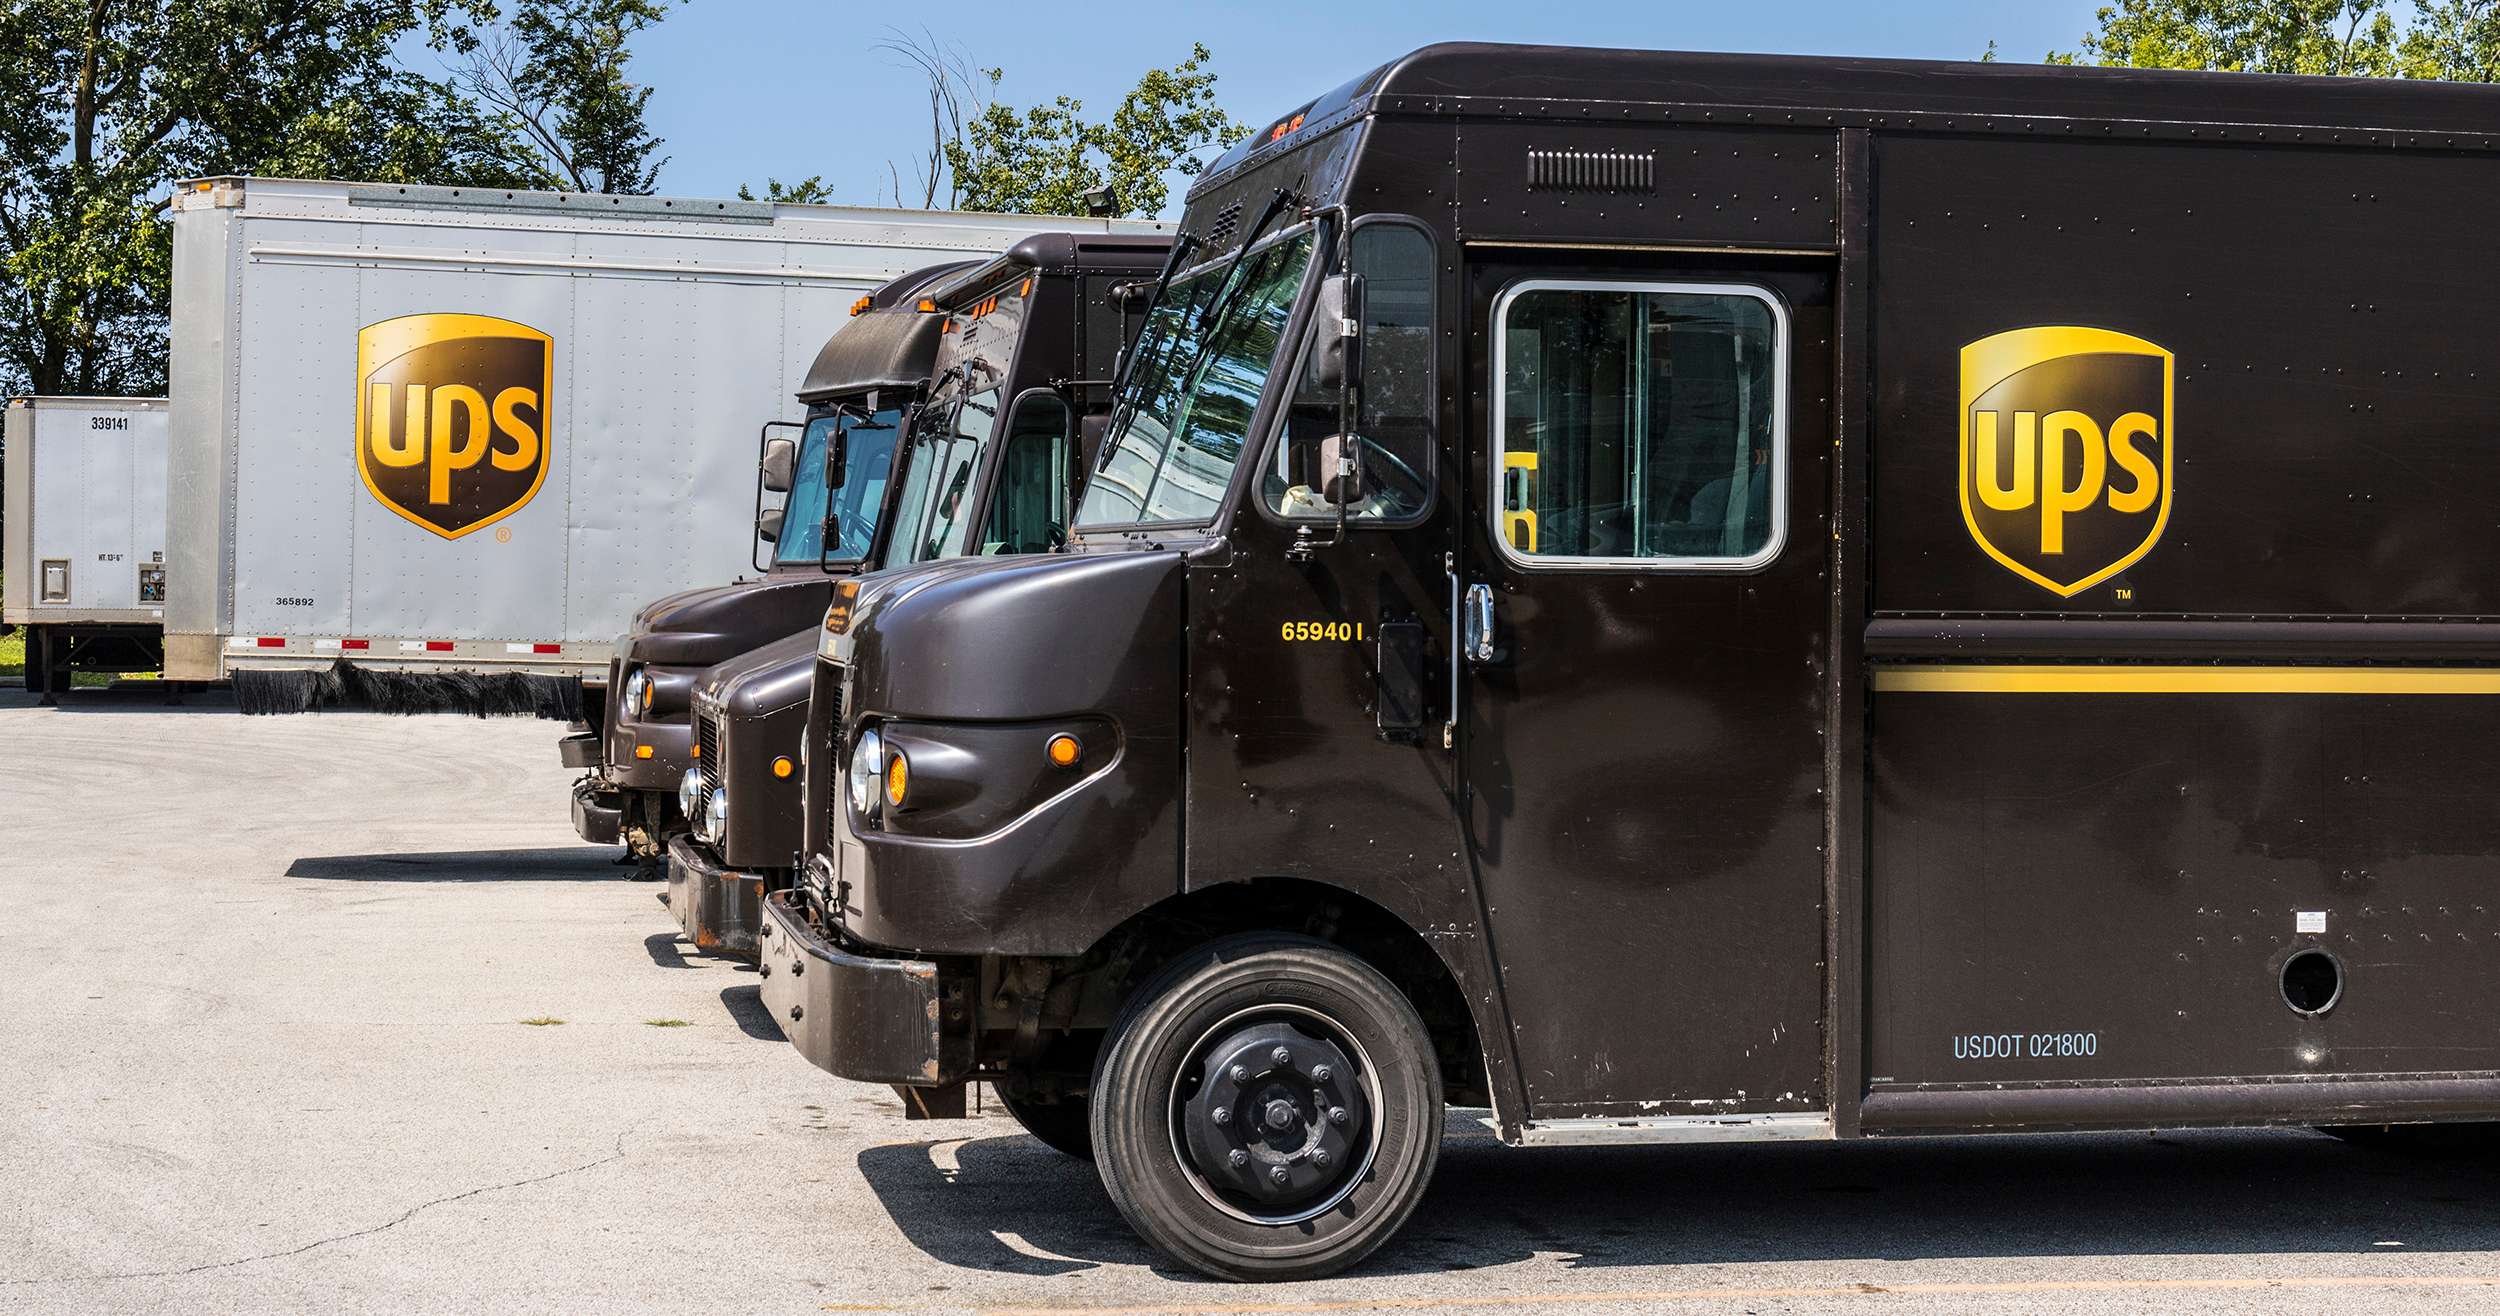 Kokomo - Circa August 2017: United Parcel Service Delivery Truck. UPS is the World's Largest Package Delivery Company VI